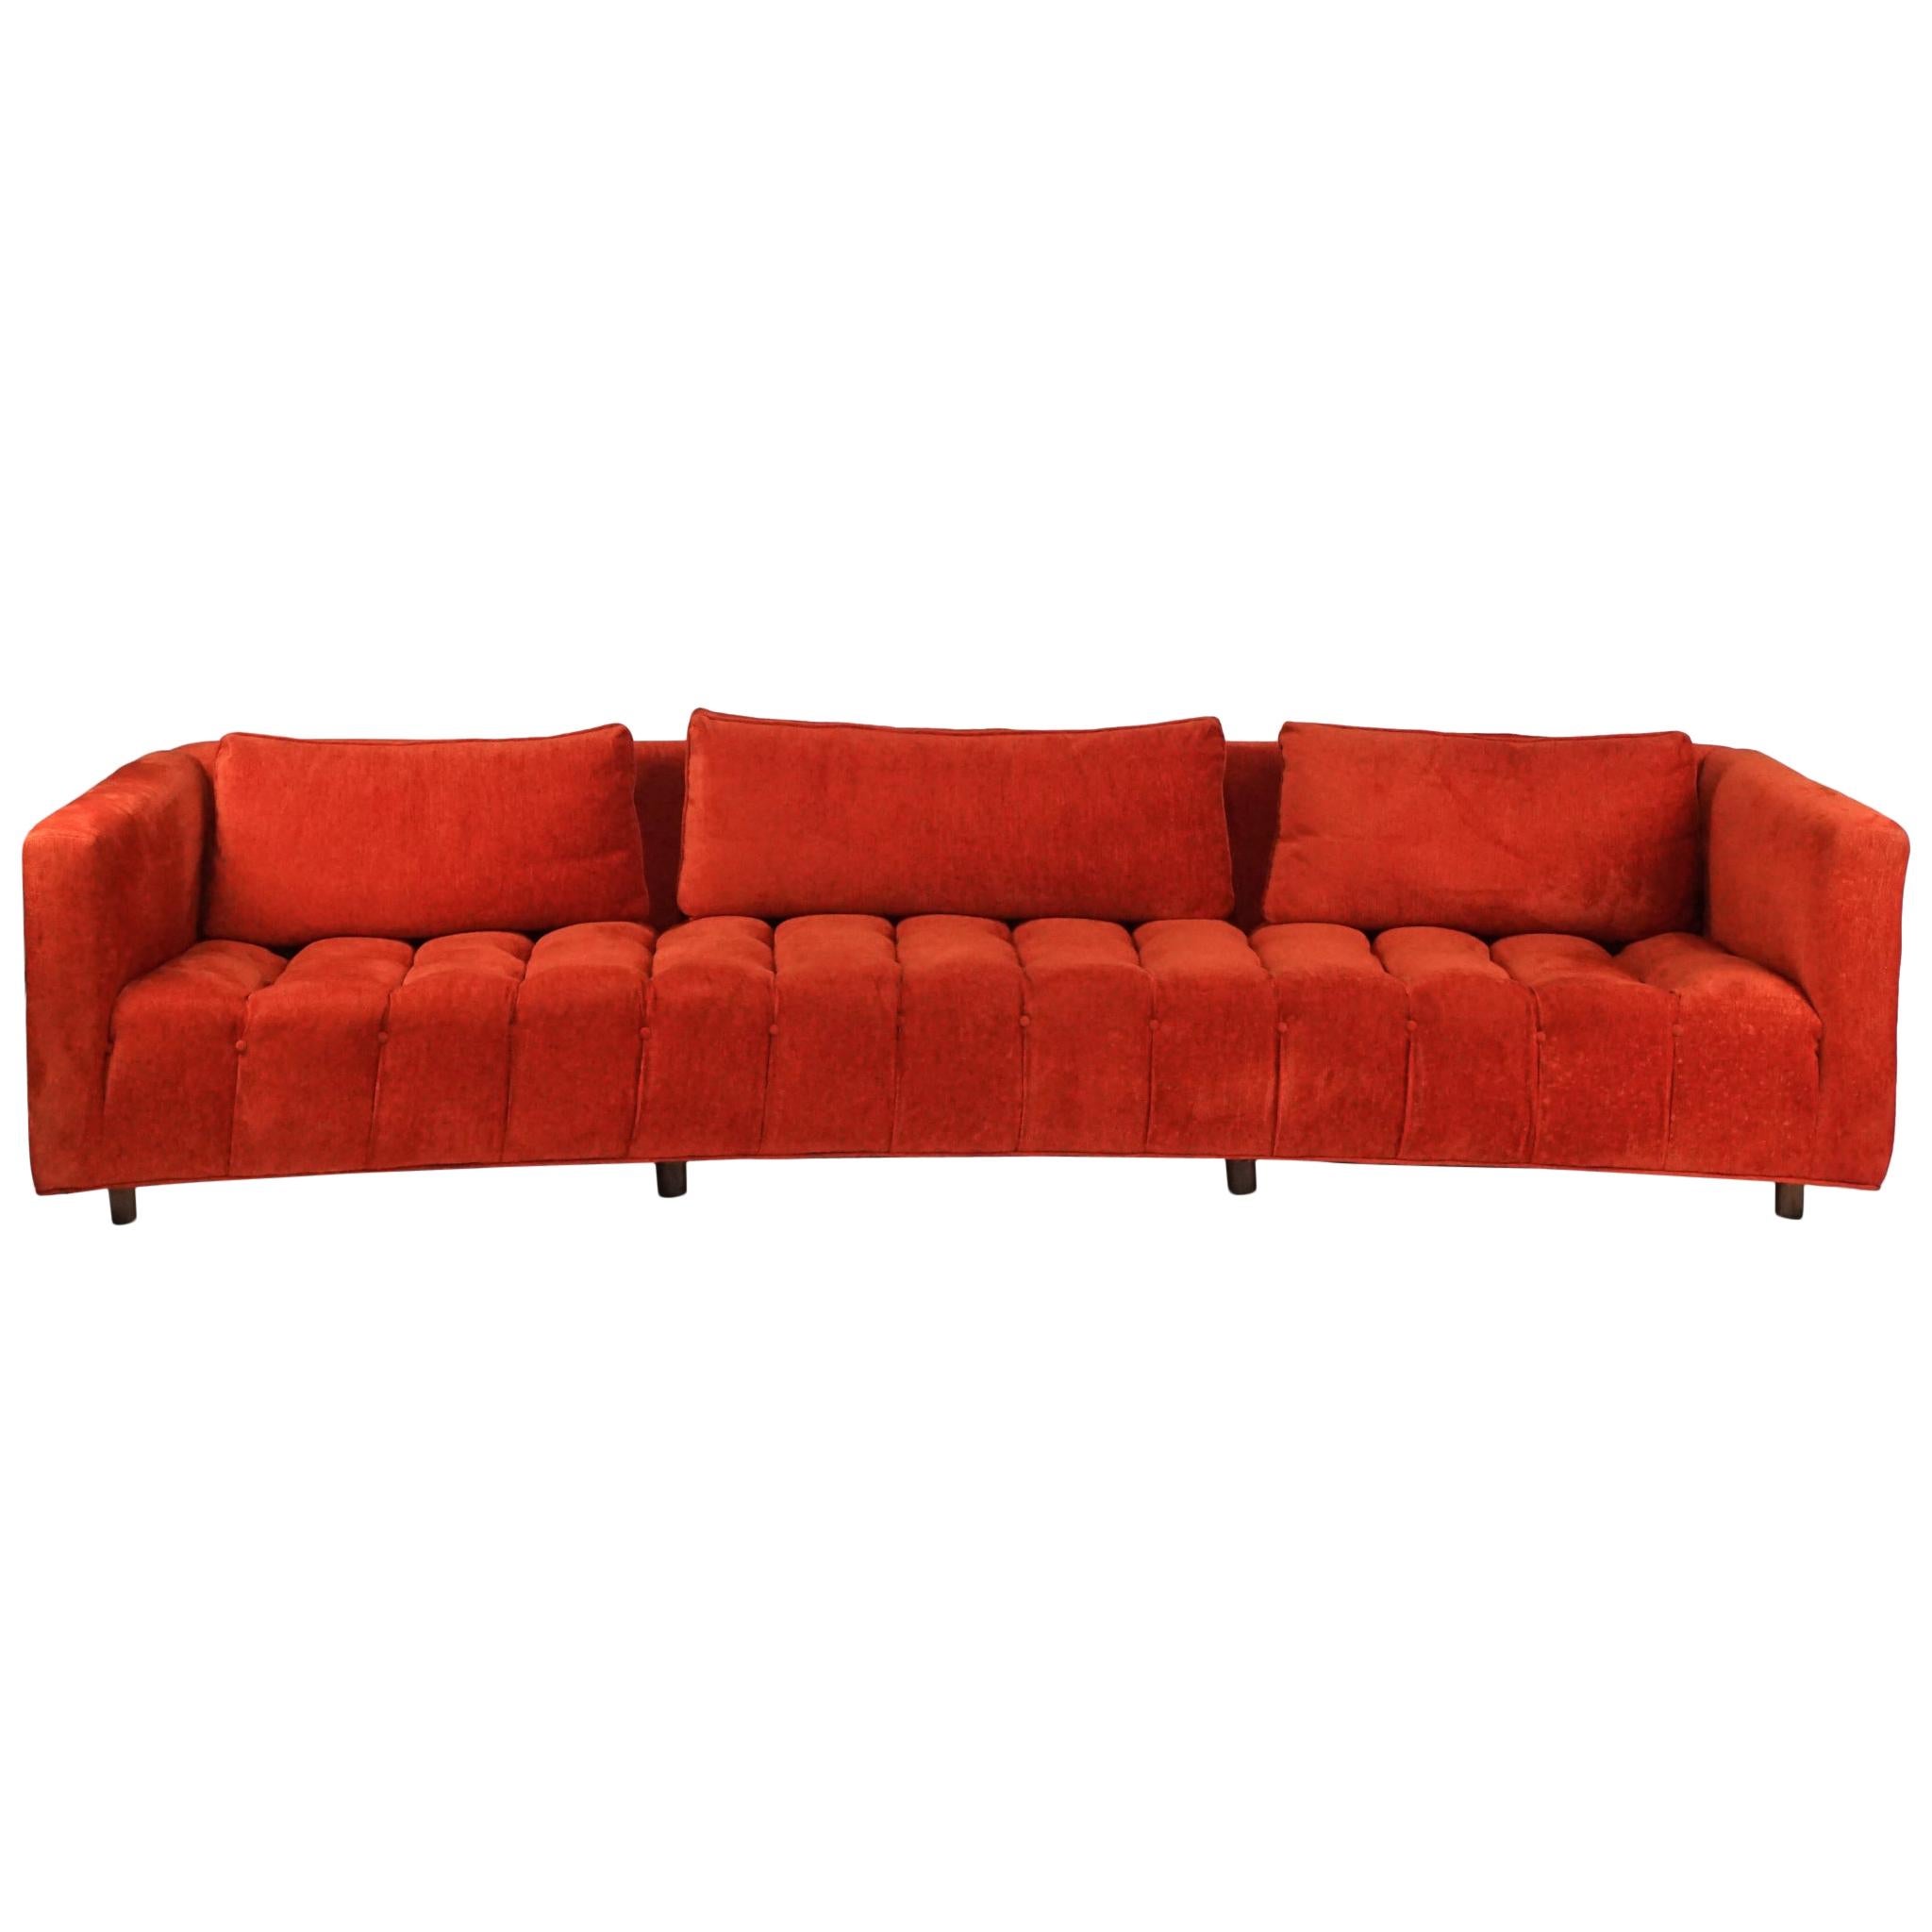 Mid-Century Modern Sculptural Curved Tufted Erwin Lambeth Sofa in Red